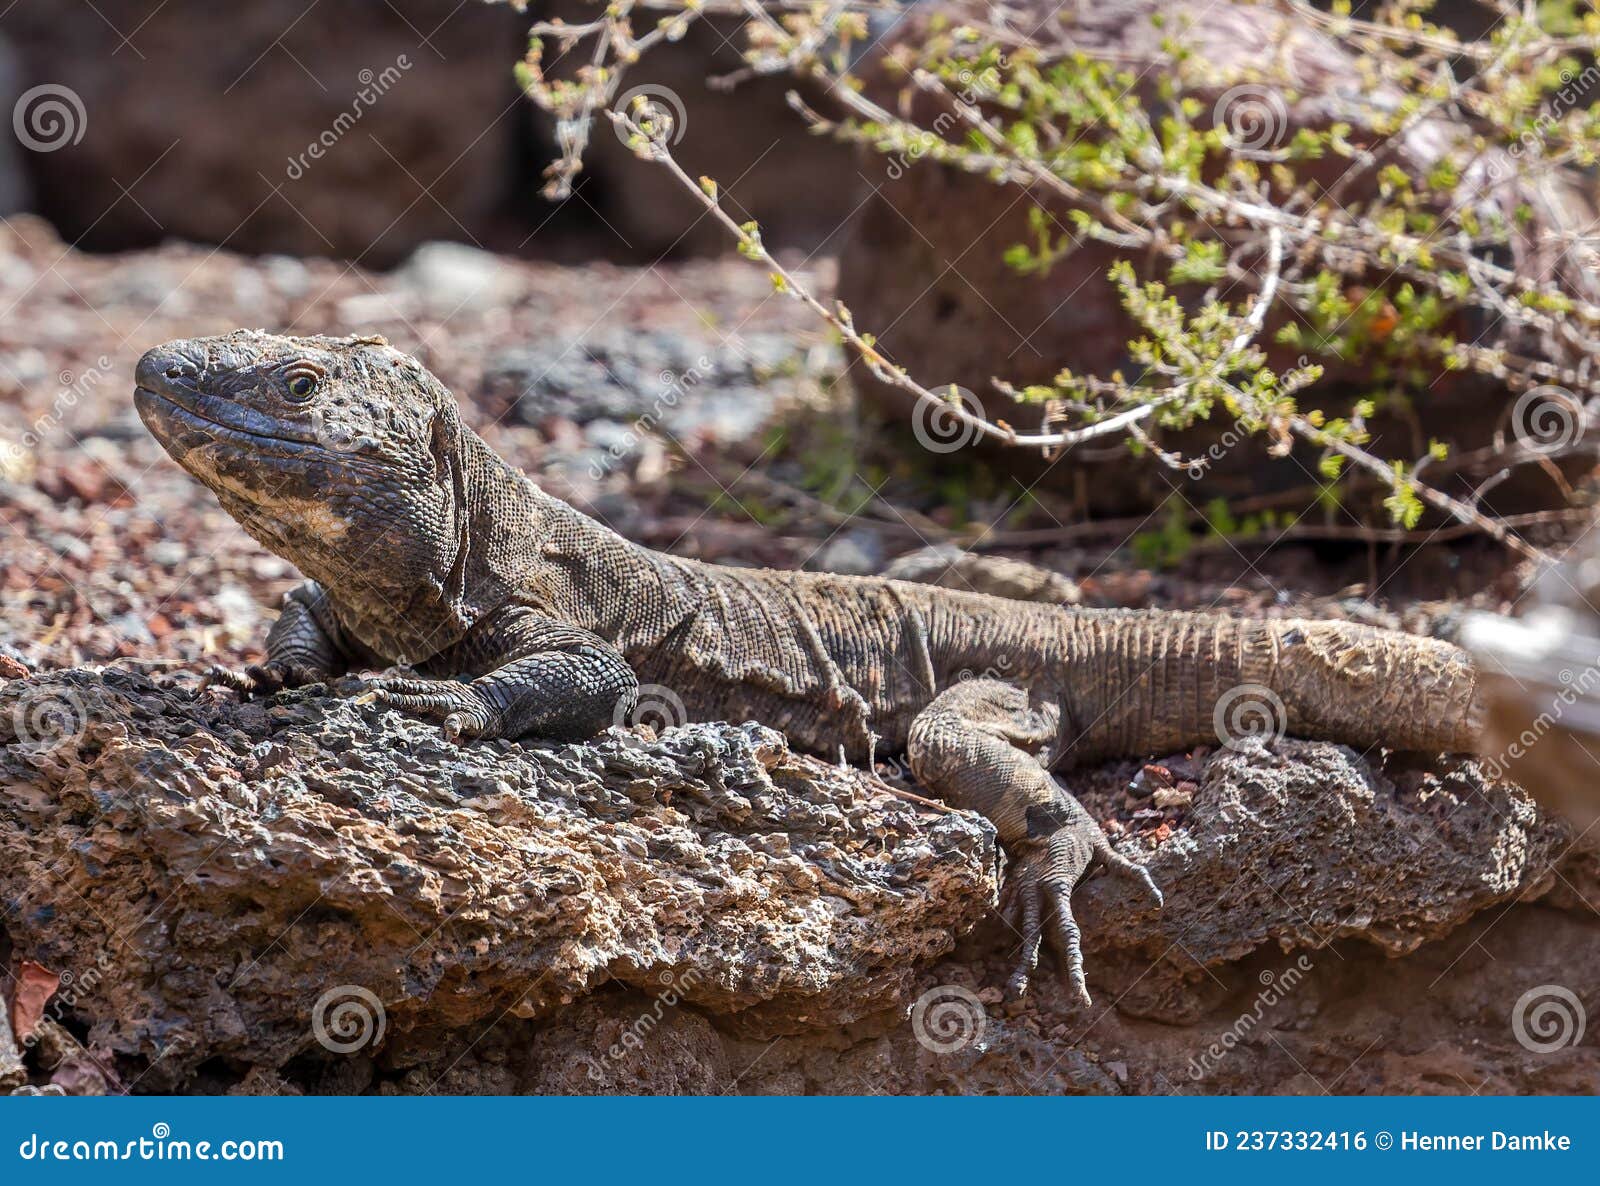 close-up view of a giant el hierro lizard